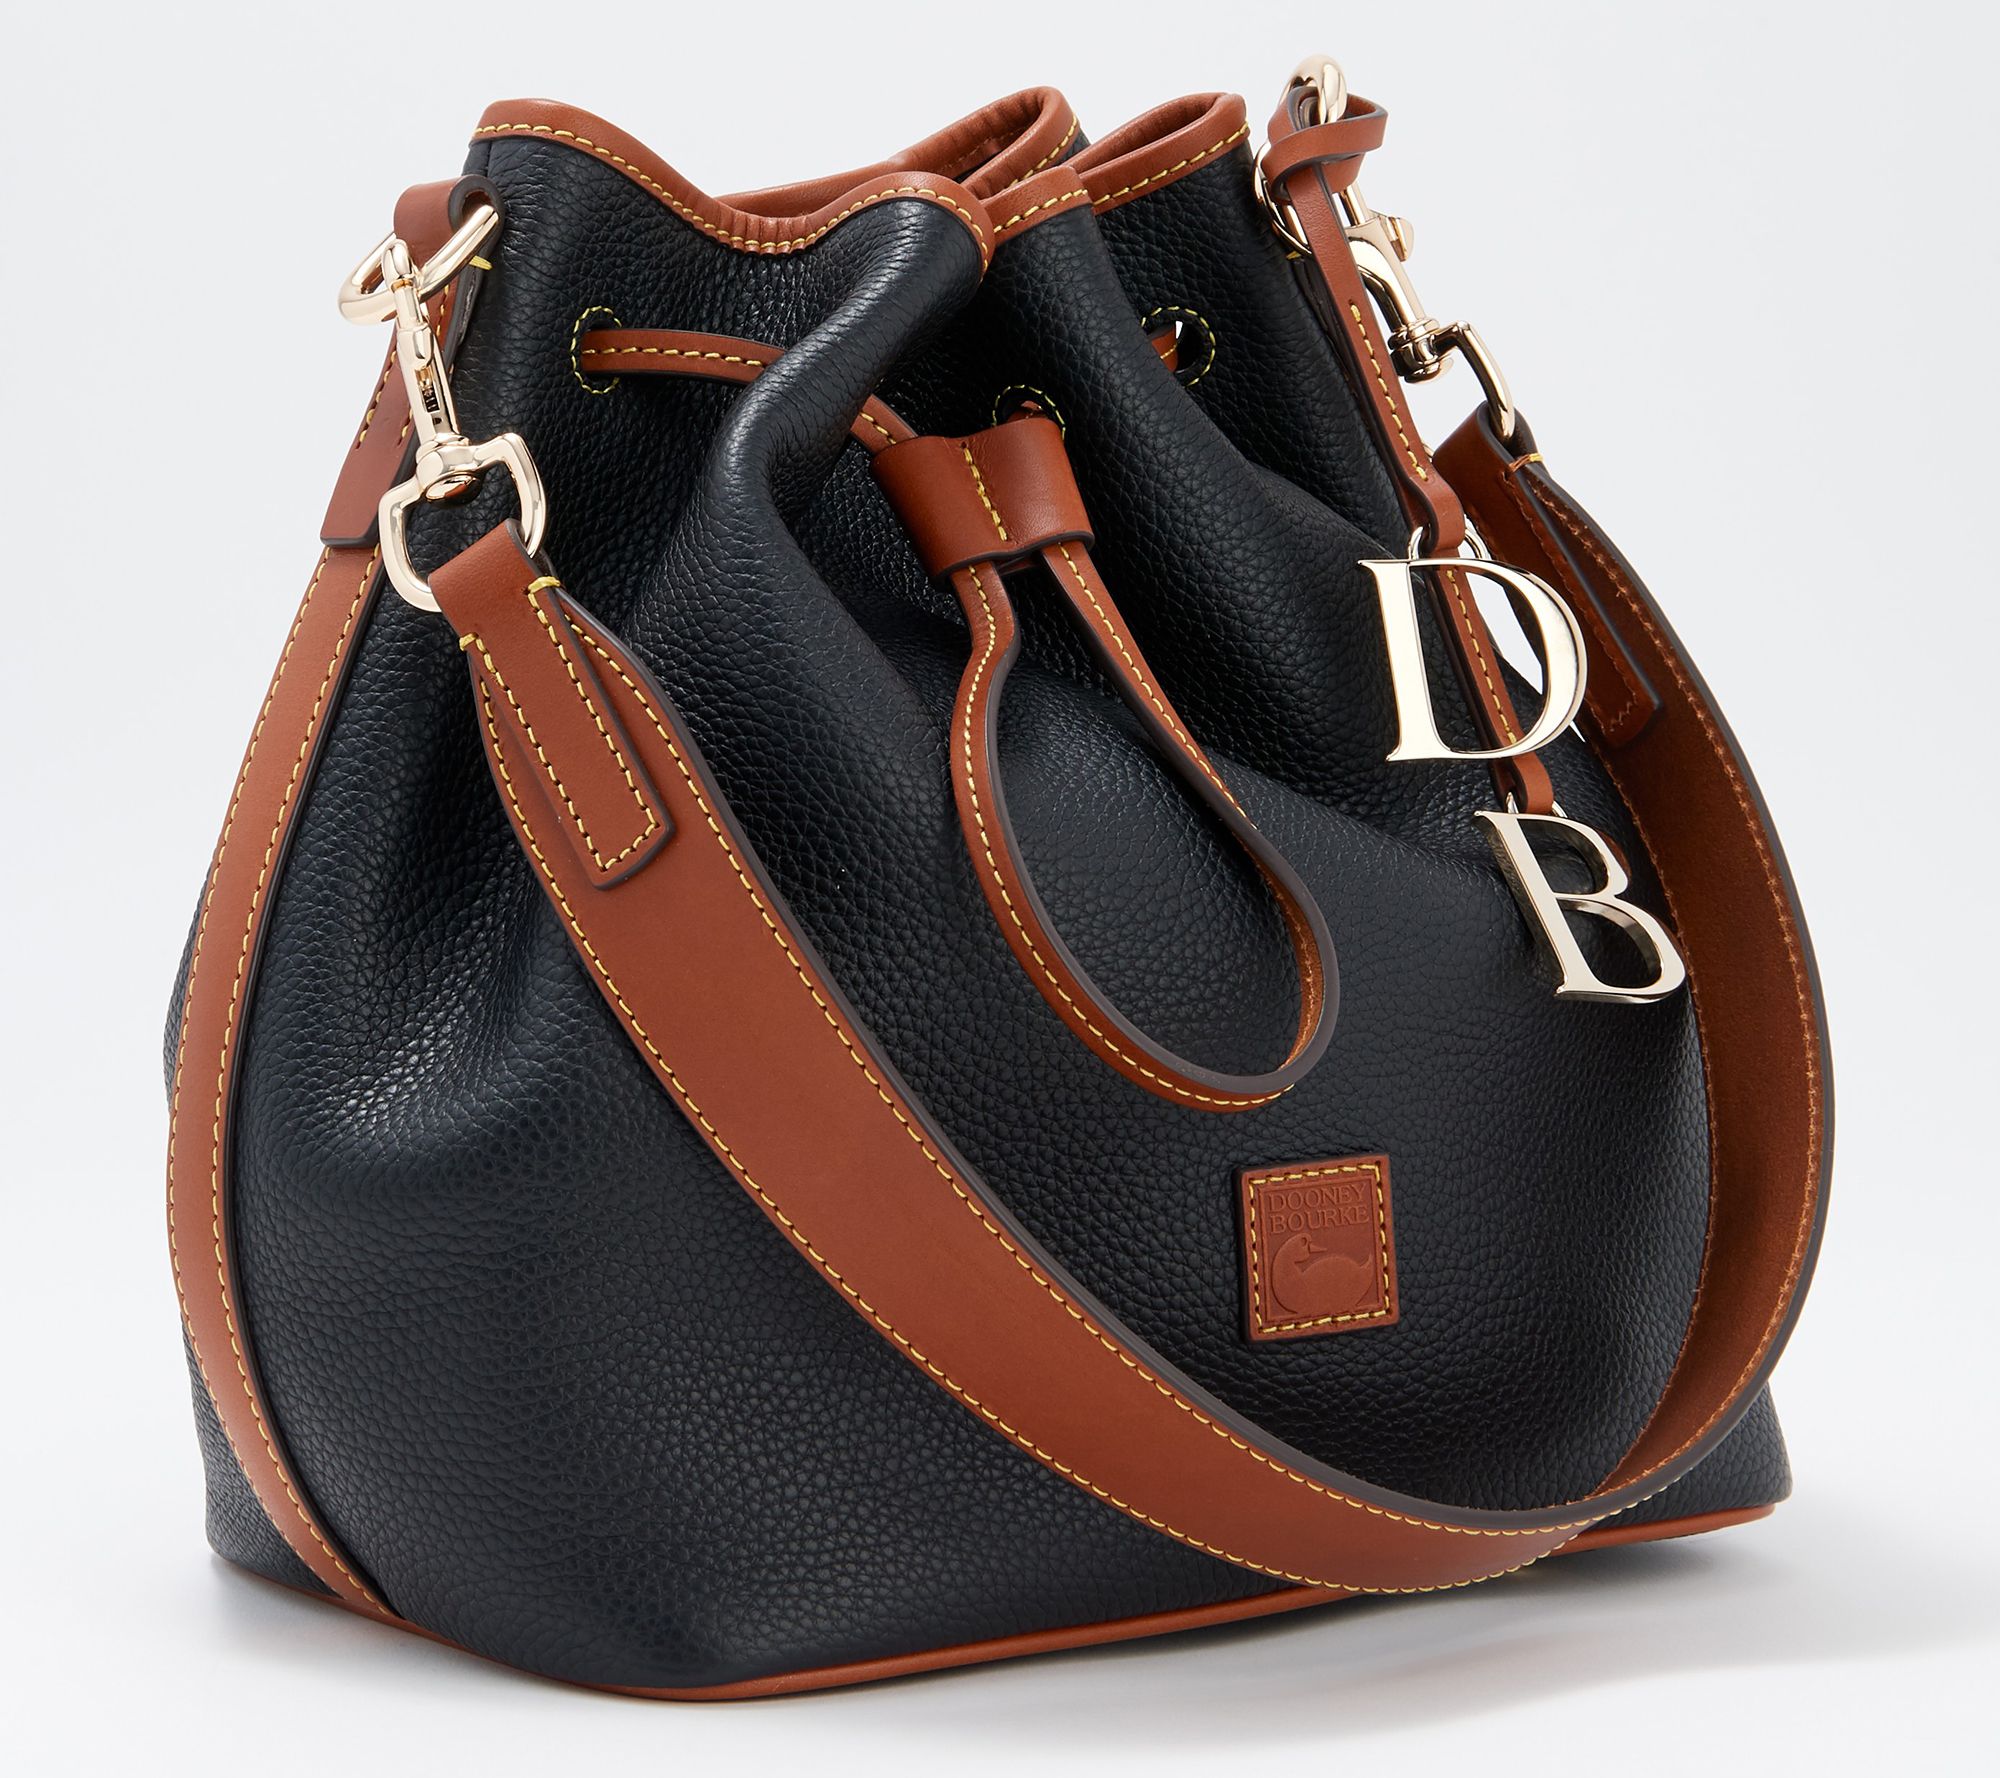 Dooney & Bourke Pebble Leather Serena Drawstring with Pouch on QVC